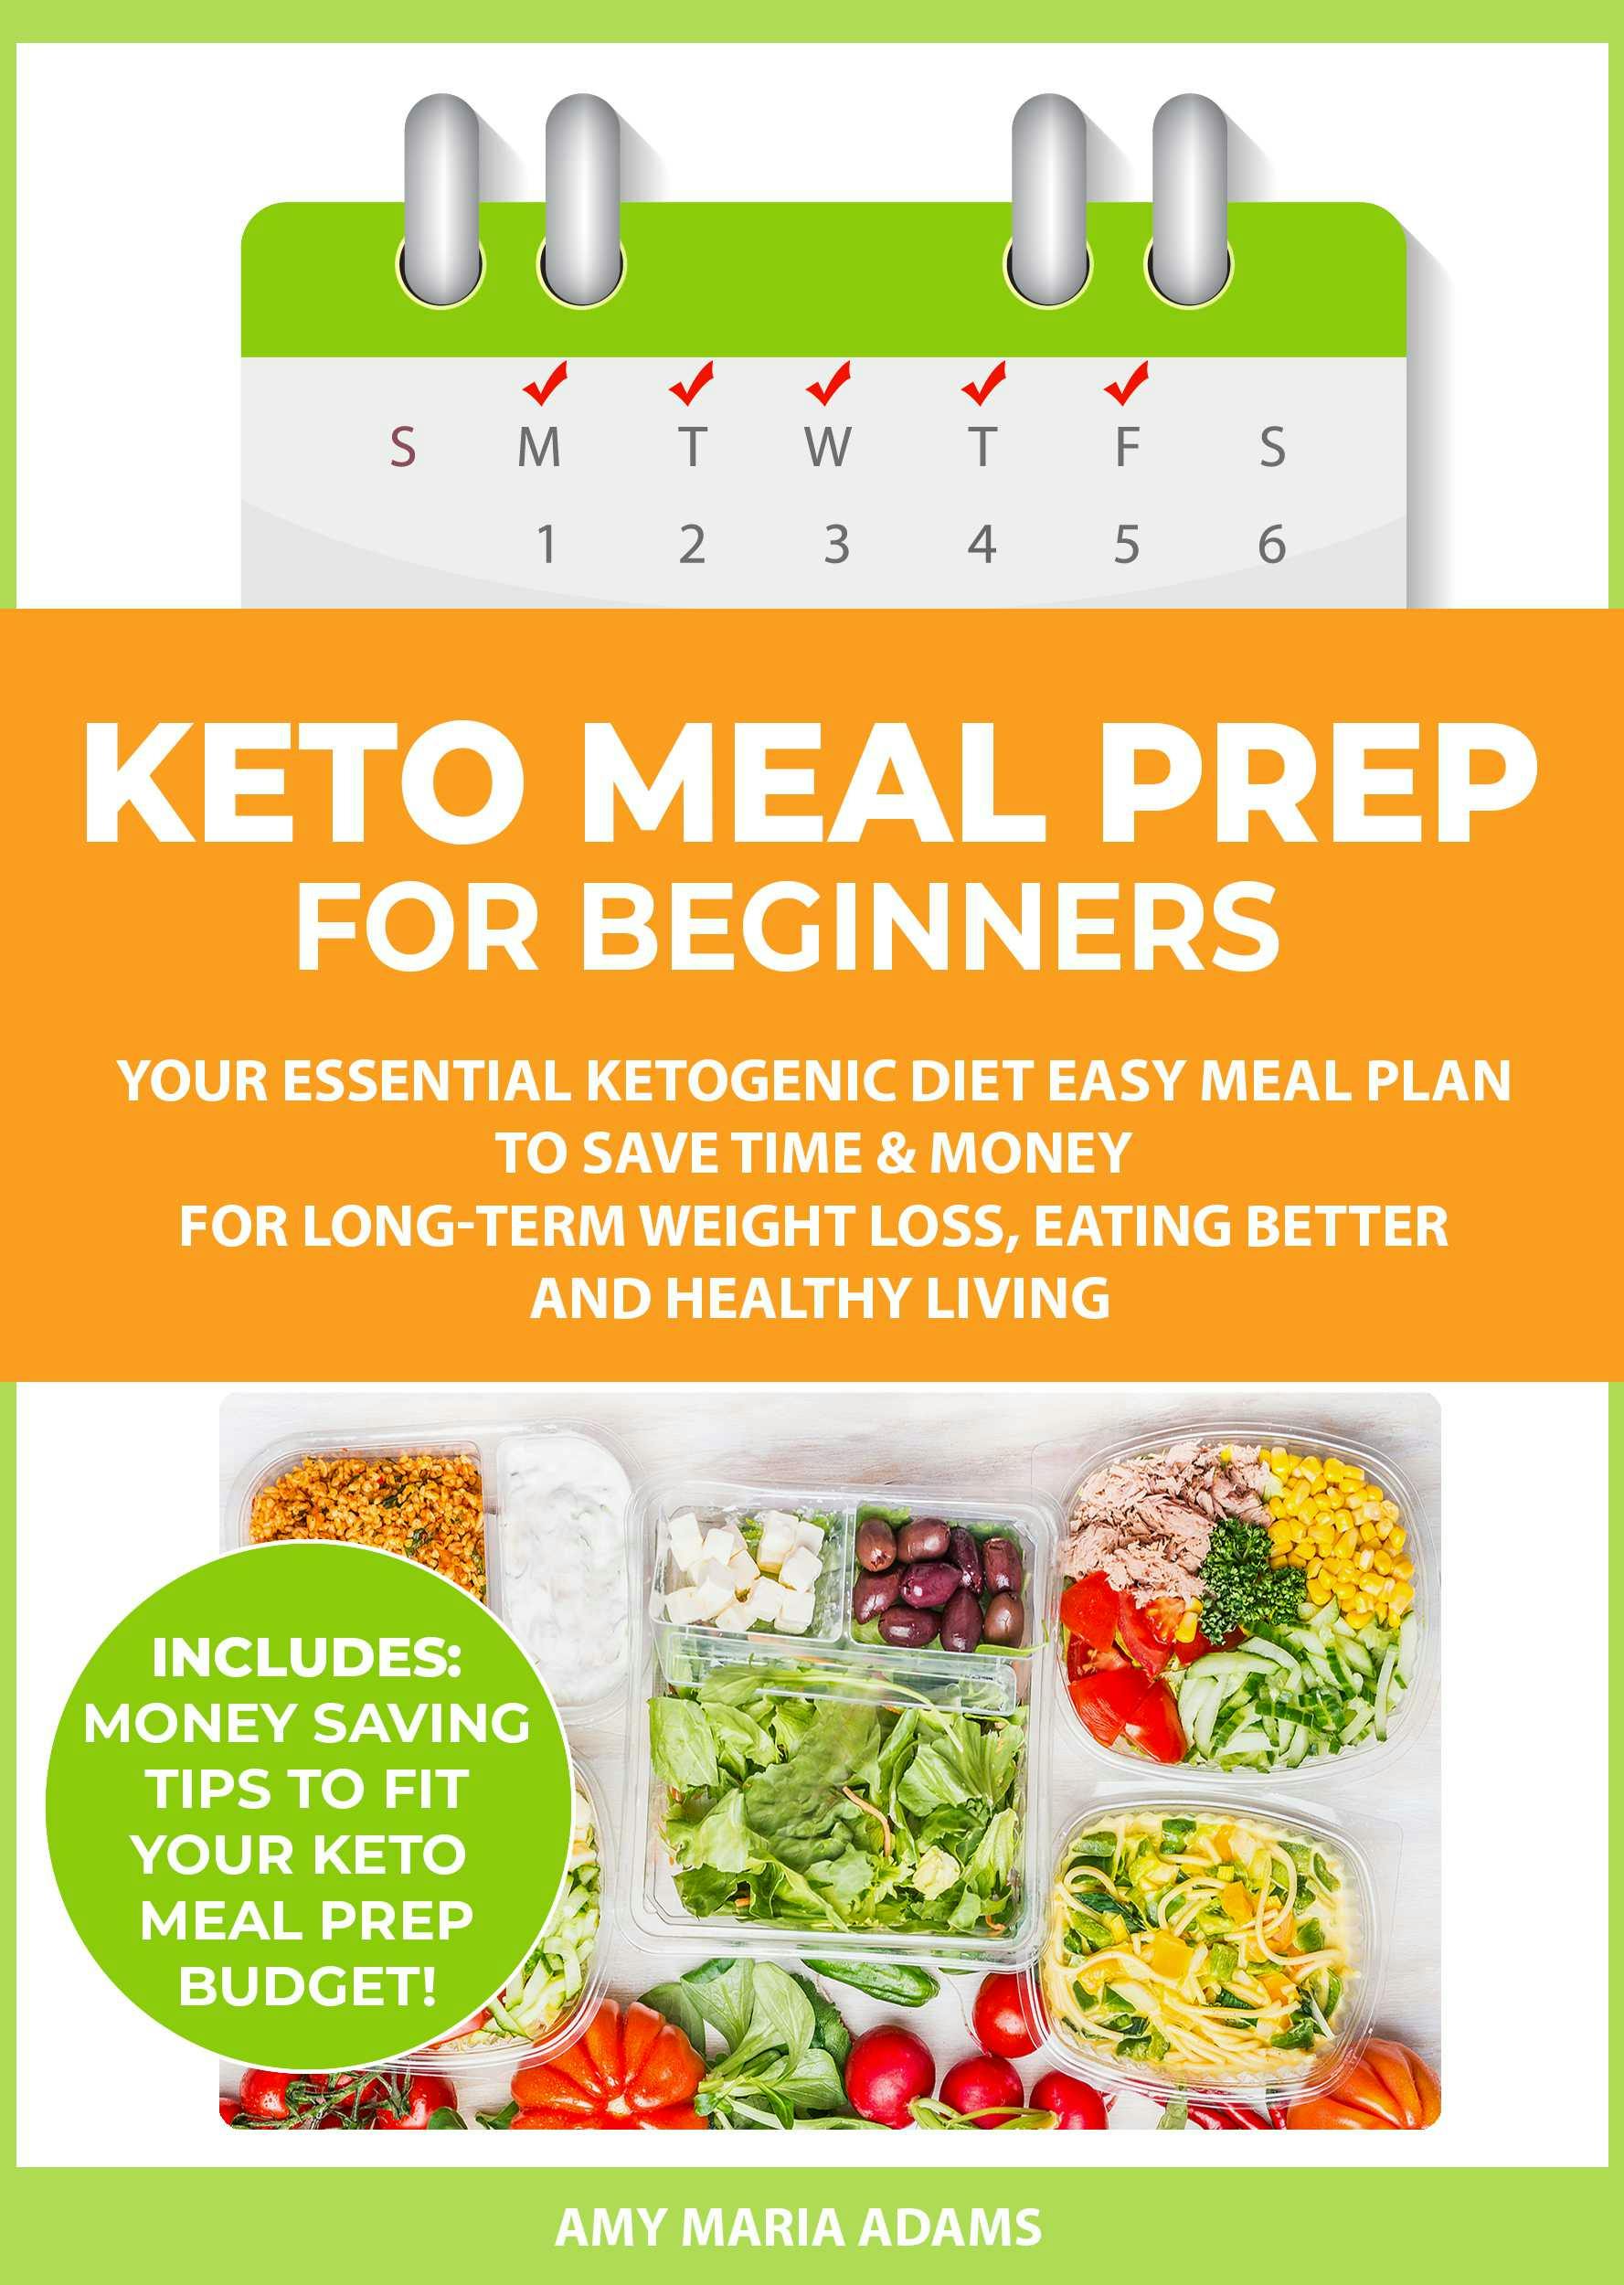 Keto Meal Prep for Beginners - Amy Maria Adams